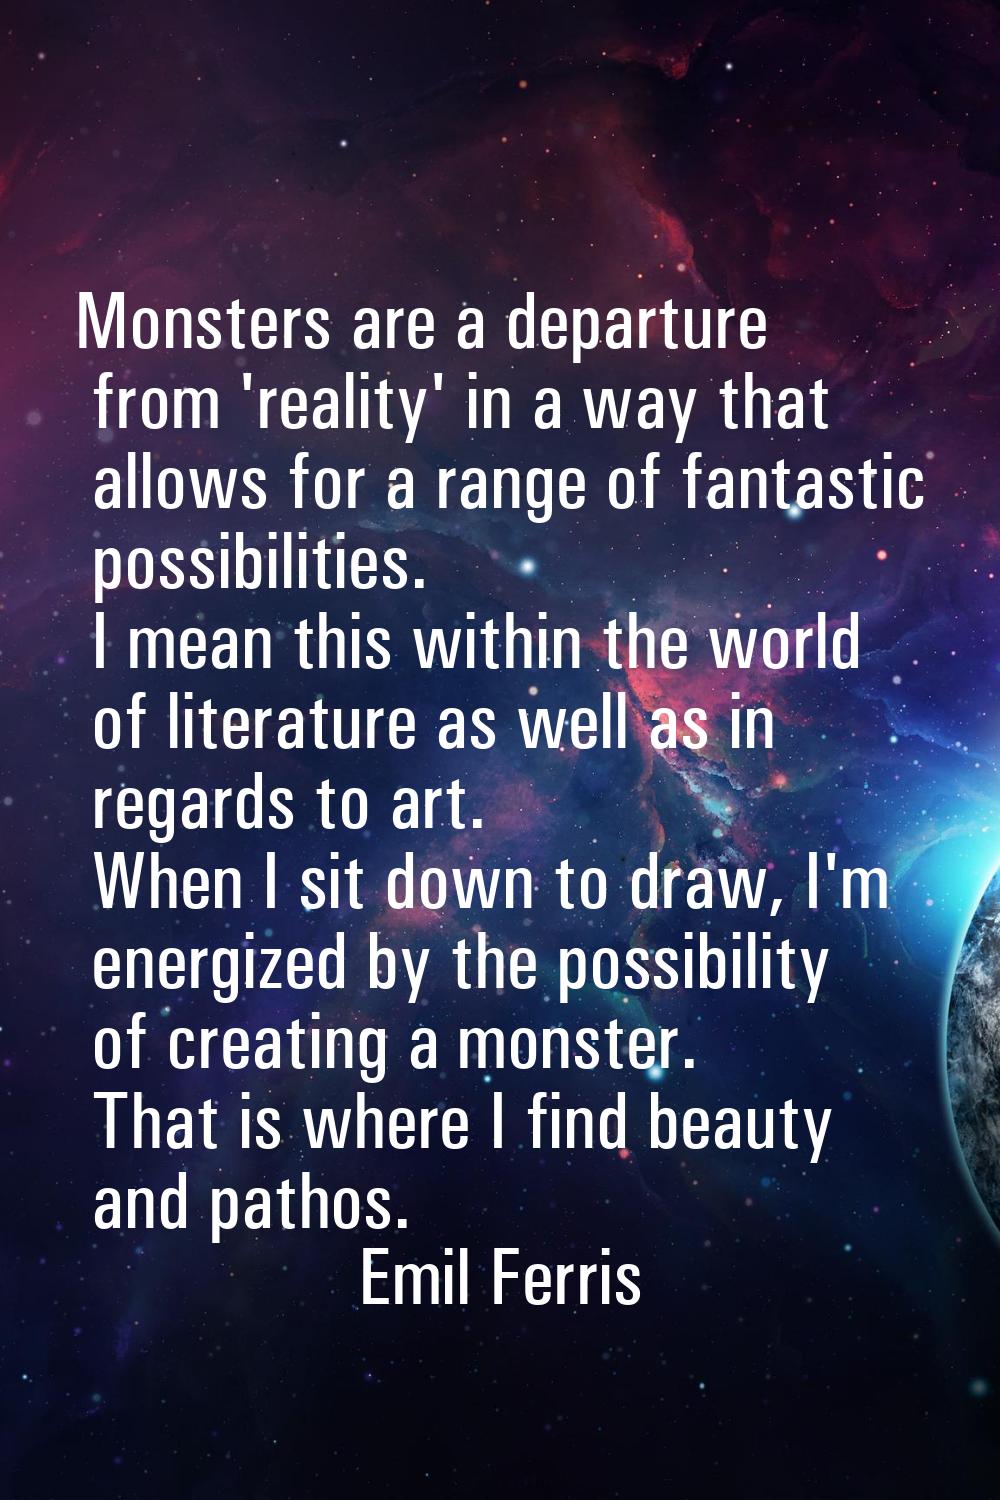 Monsters are a departure from 'reality' in a way that allows for a range of fantastic possibilities